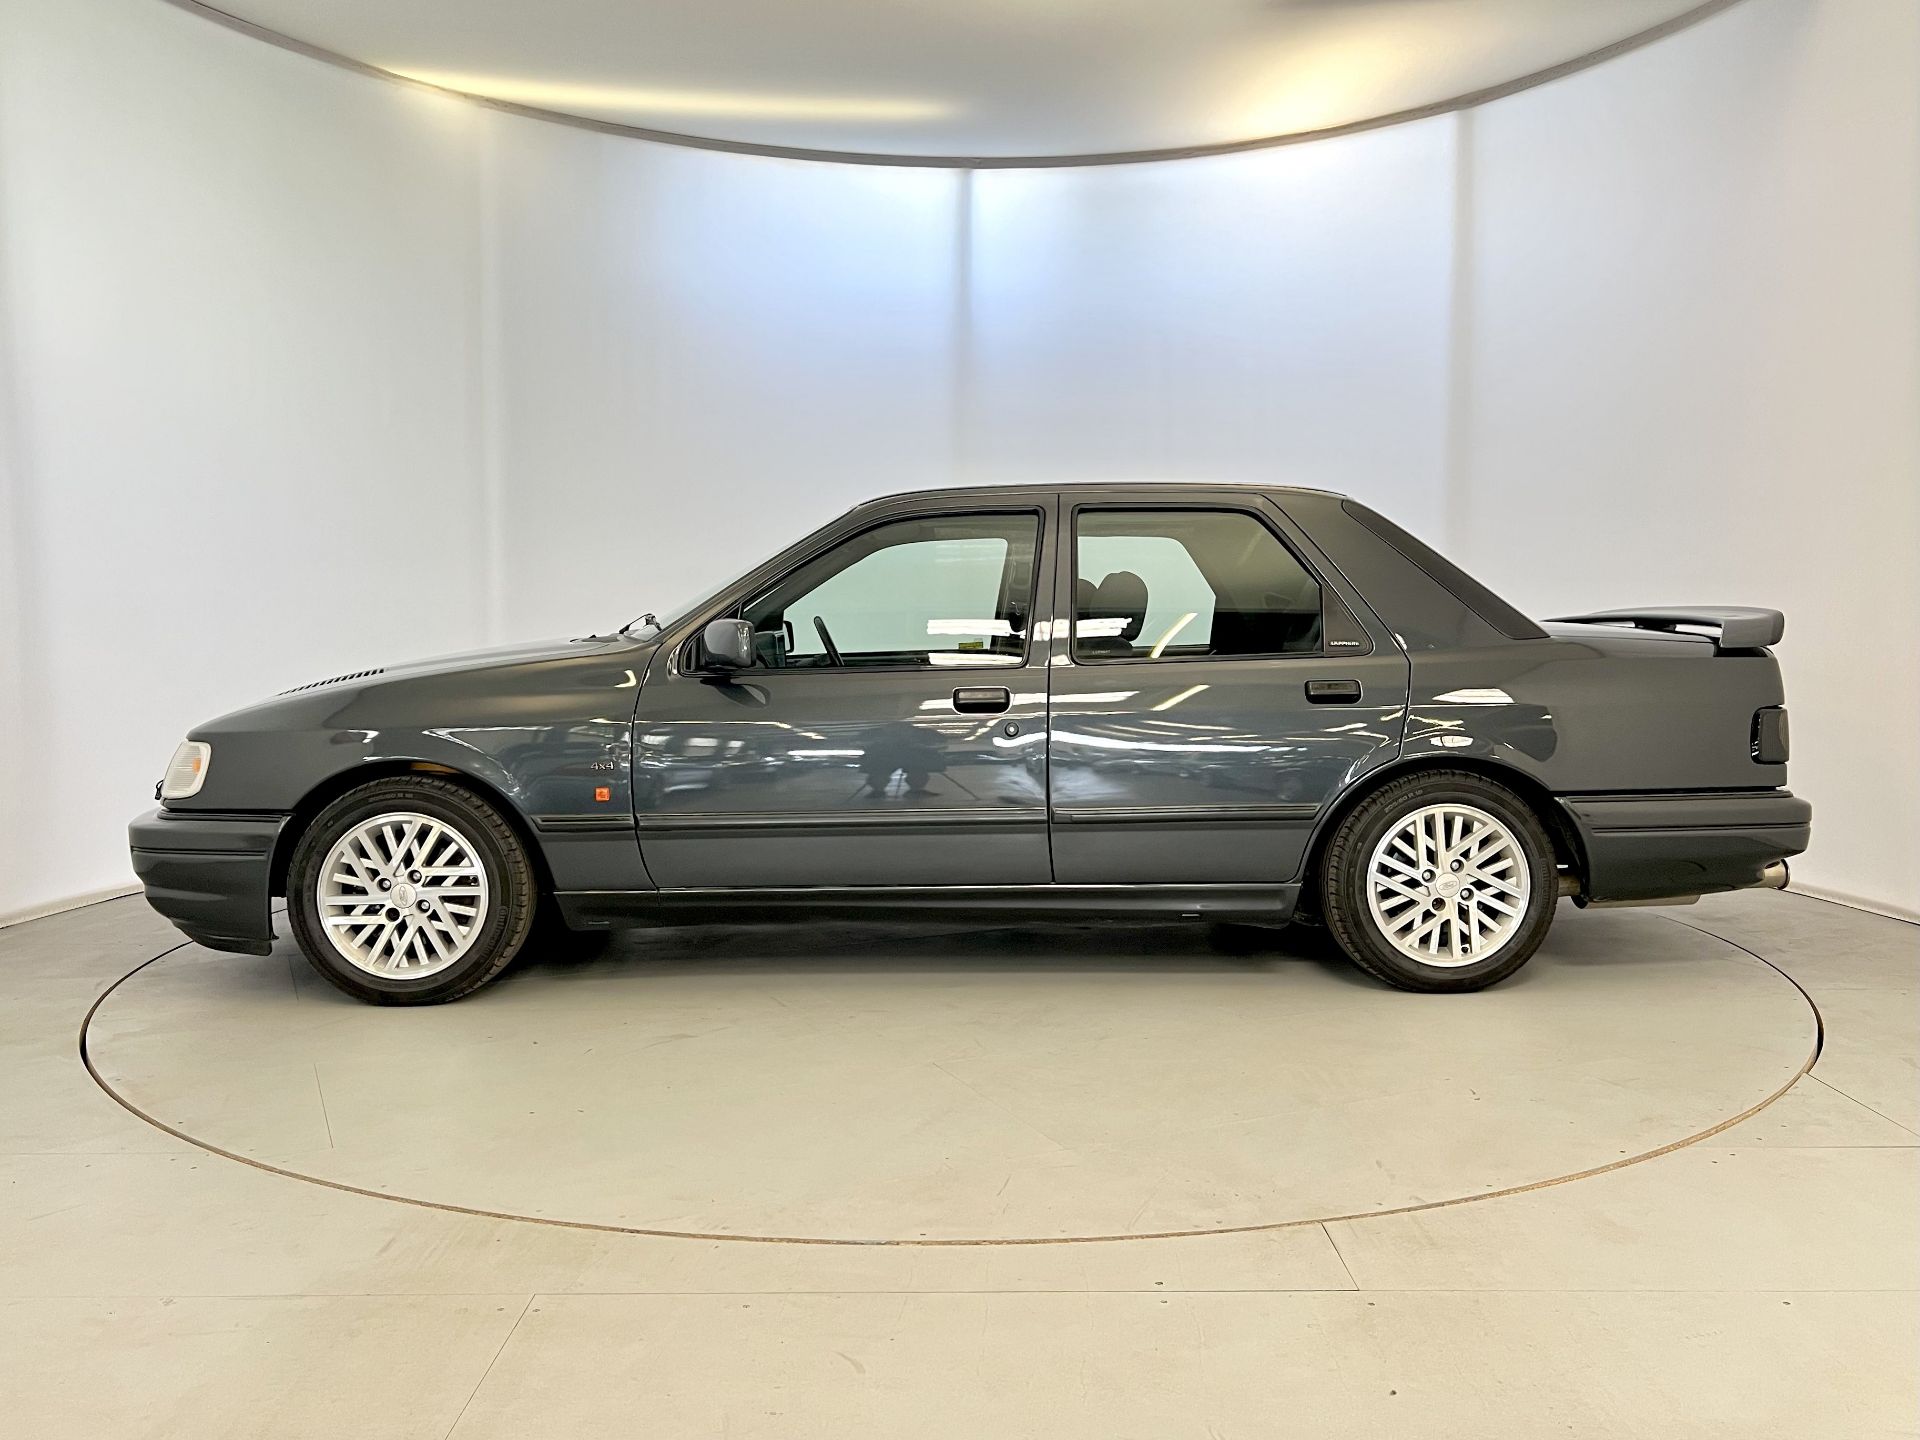 Ford Sierra Sapphire Cosworth - Image 5 of 37